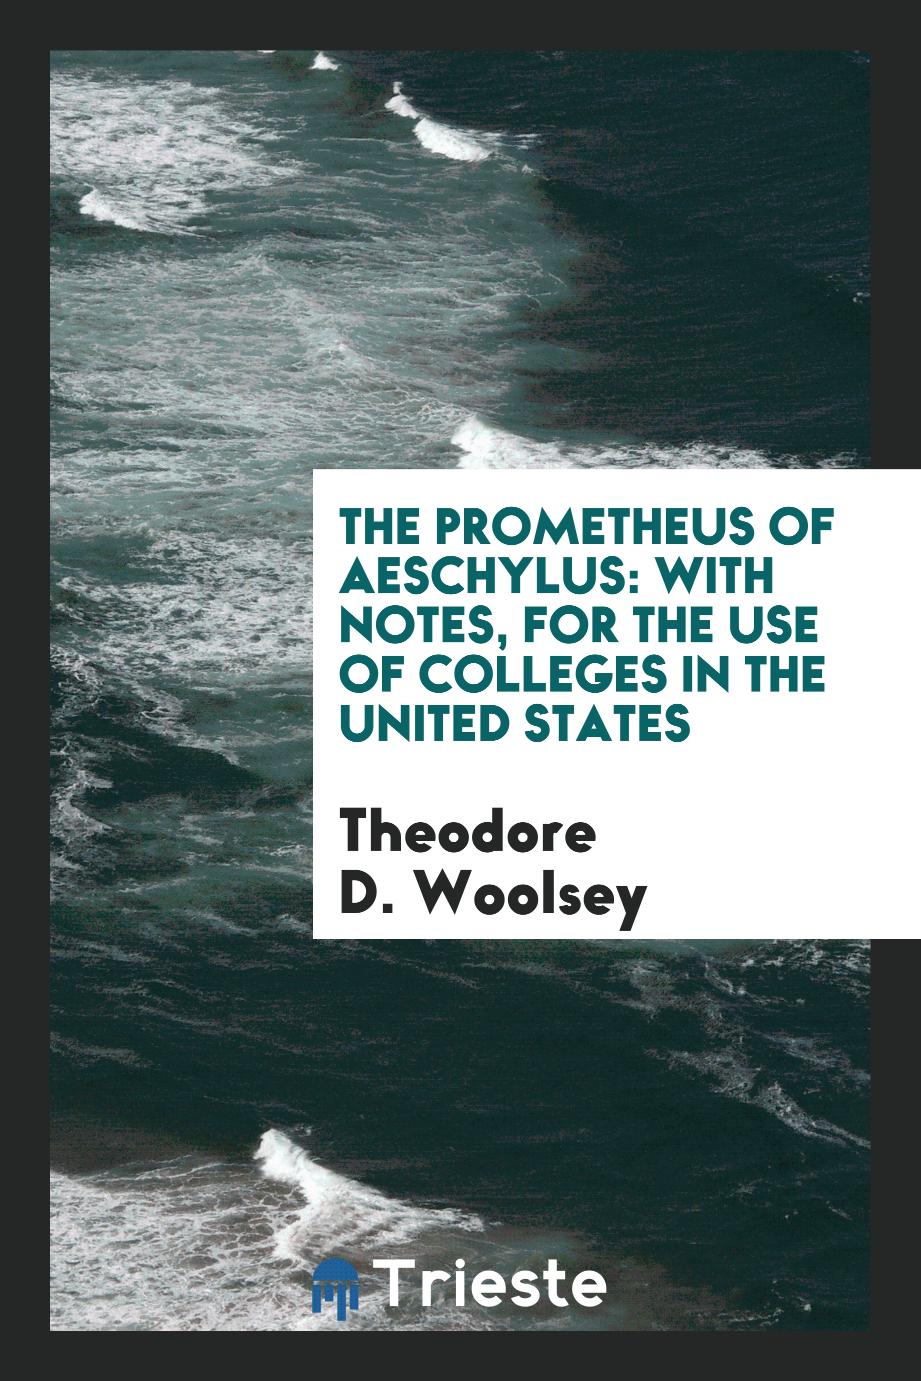 The Prometheus of Aeschylus: With Notes, for the Use of Colleges in the United States